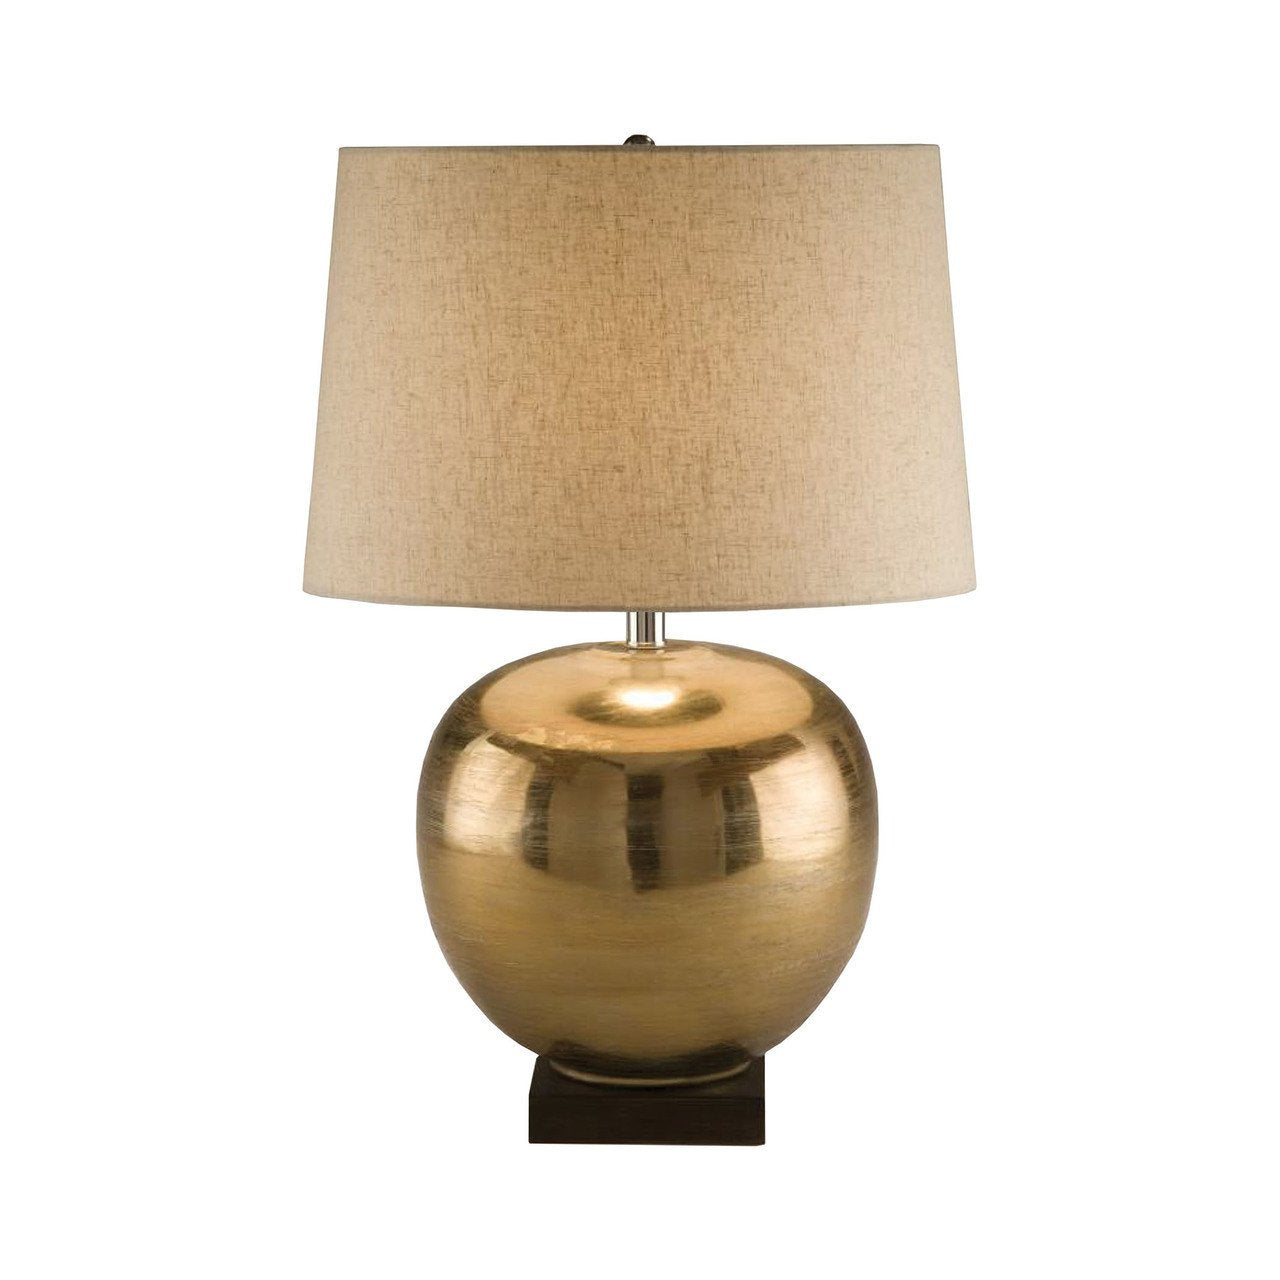 Lamp Works New Product  Brass Ball Table Lamp 8000 Sold by VaasuHomes